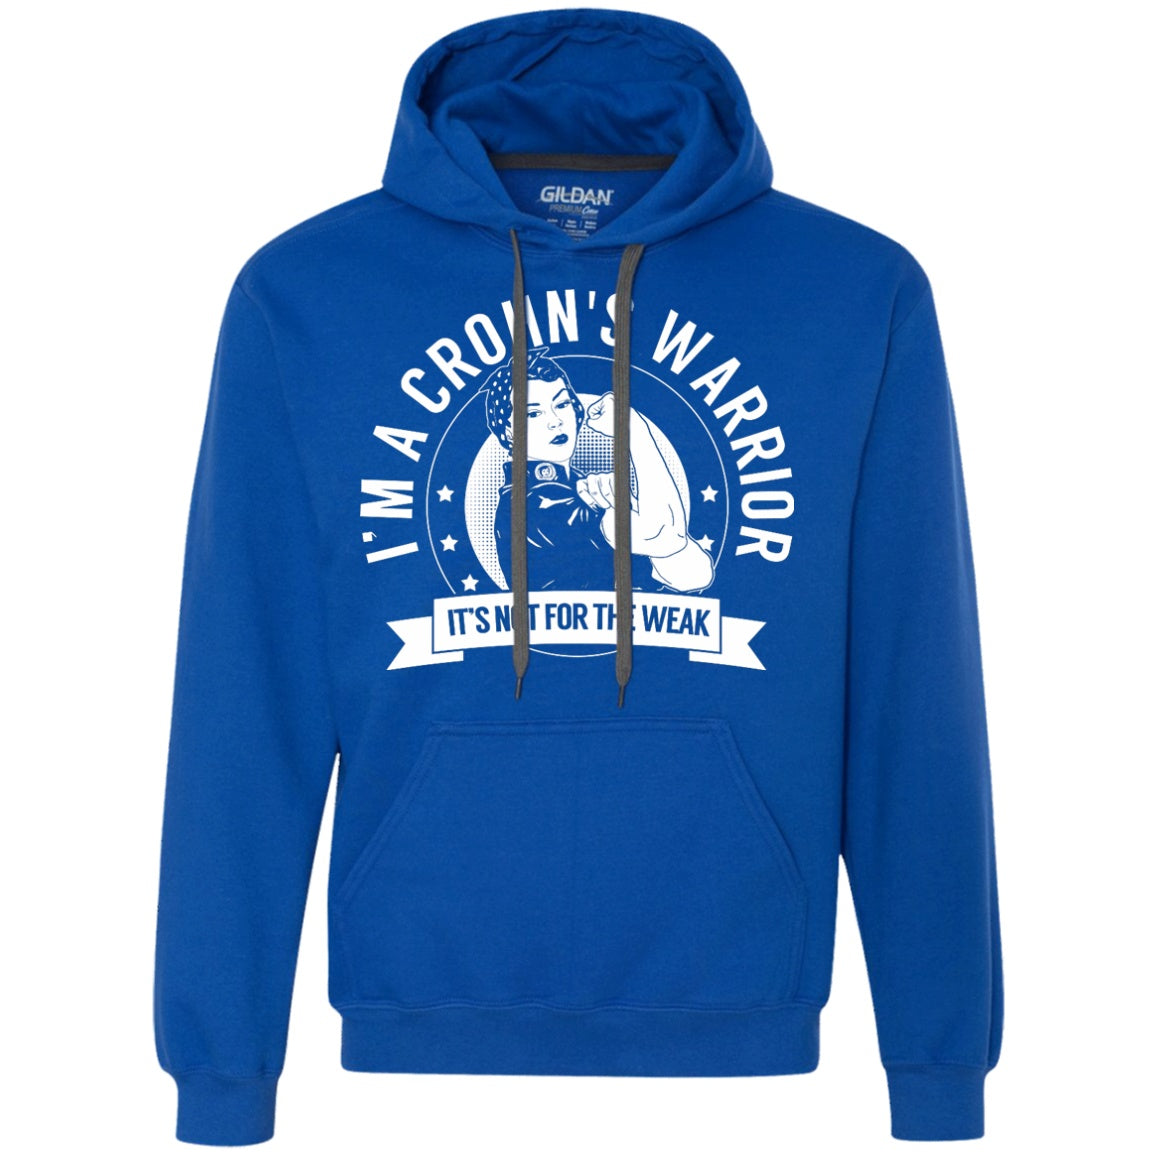 Crohn's Warrior Not For The Weak Pullover Hoodie - The Unchargeables